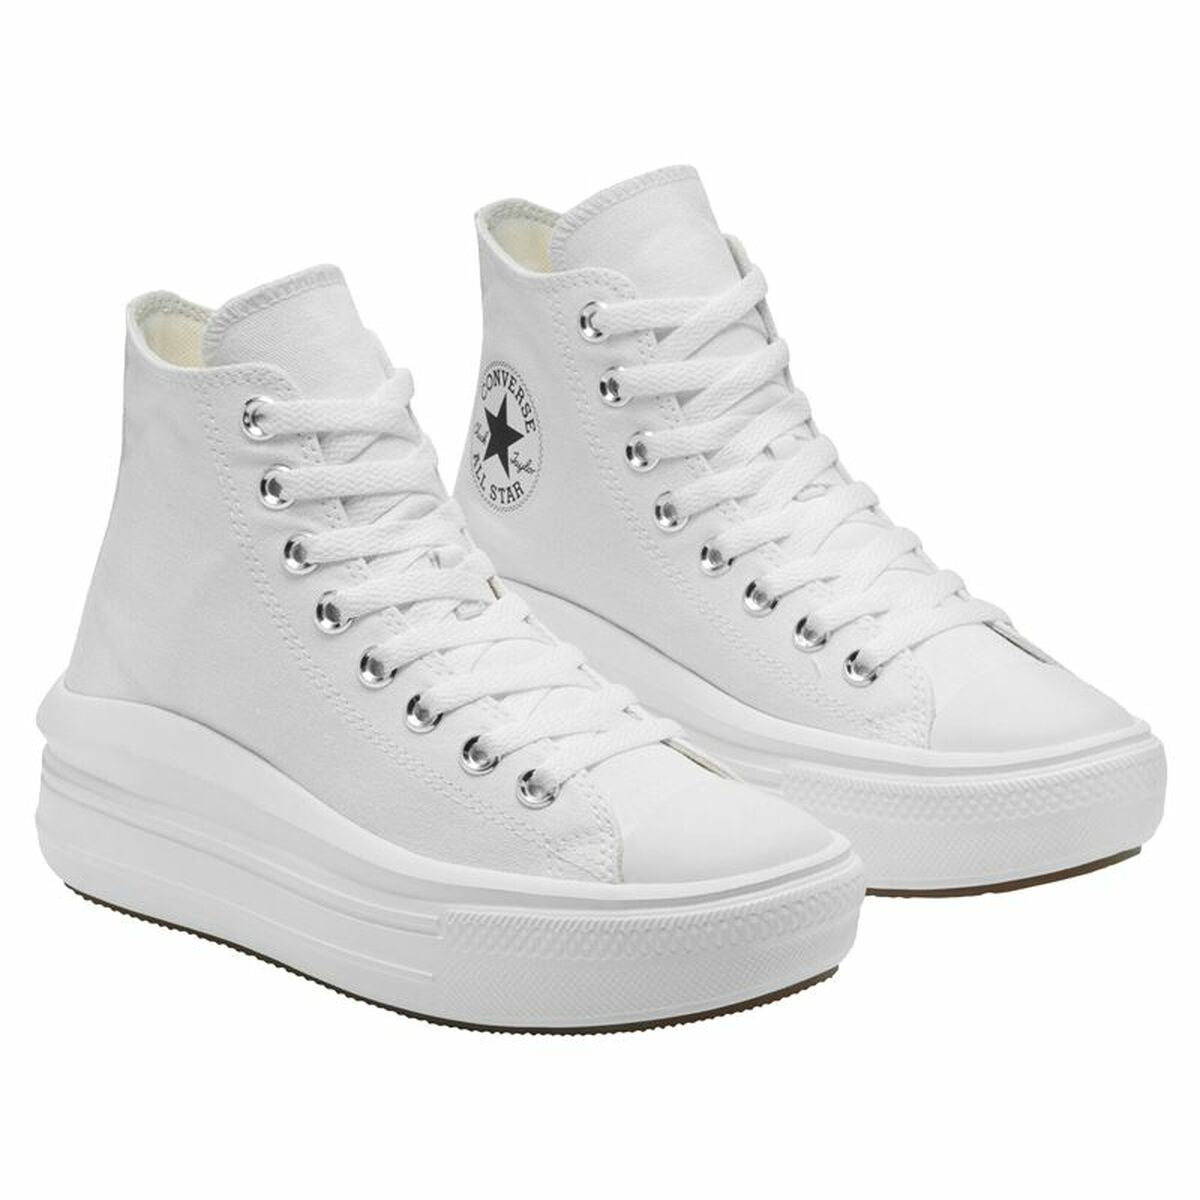 Baskets Casual pour Femme Chuck Taylor All Star Converse Move W Blanc